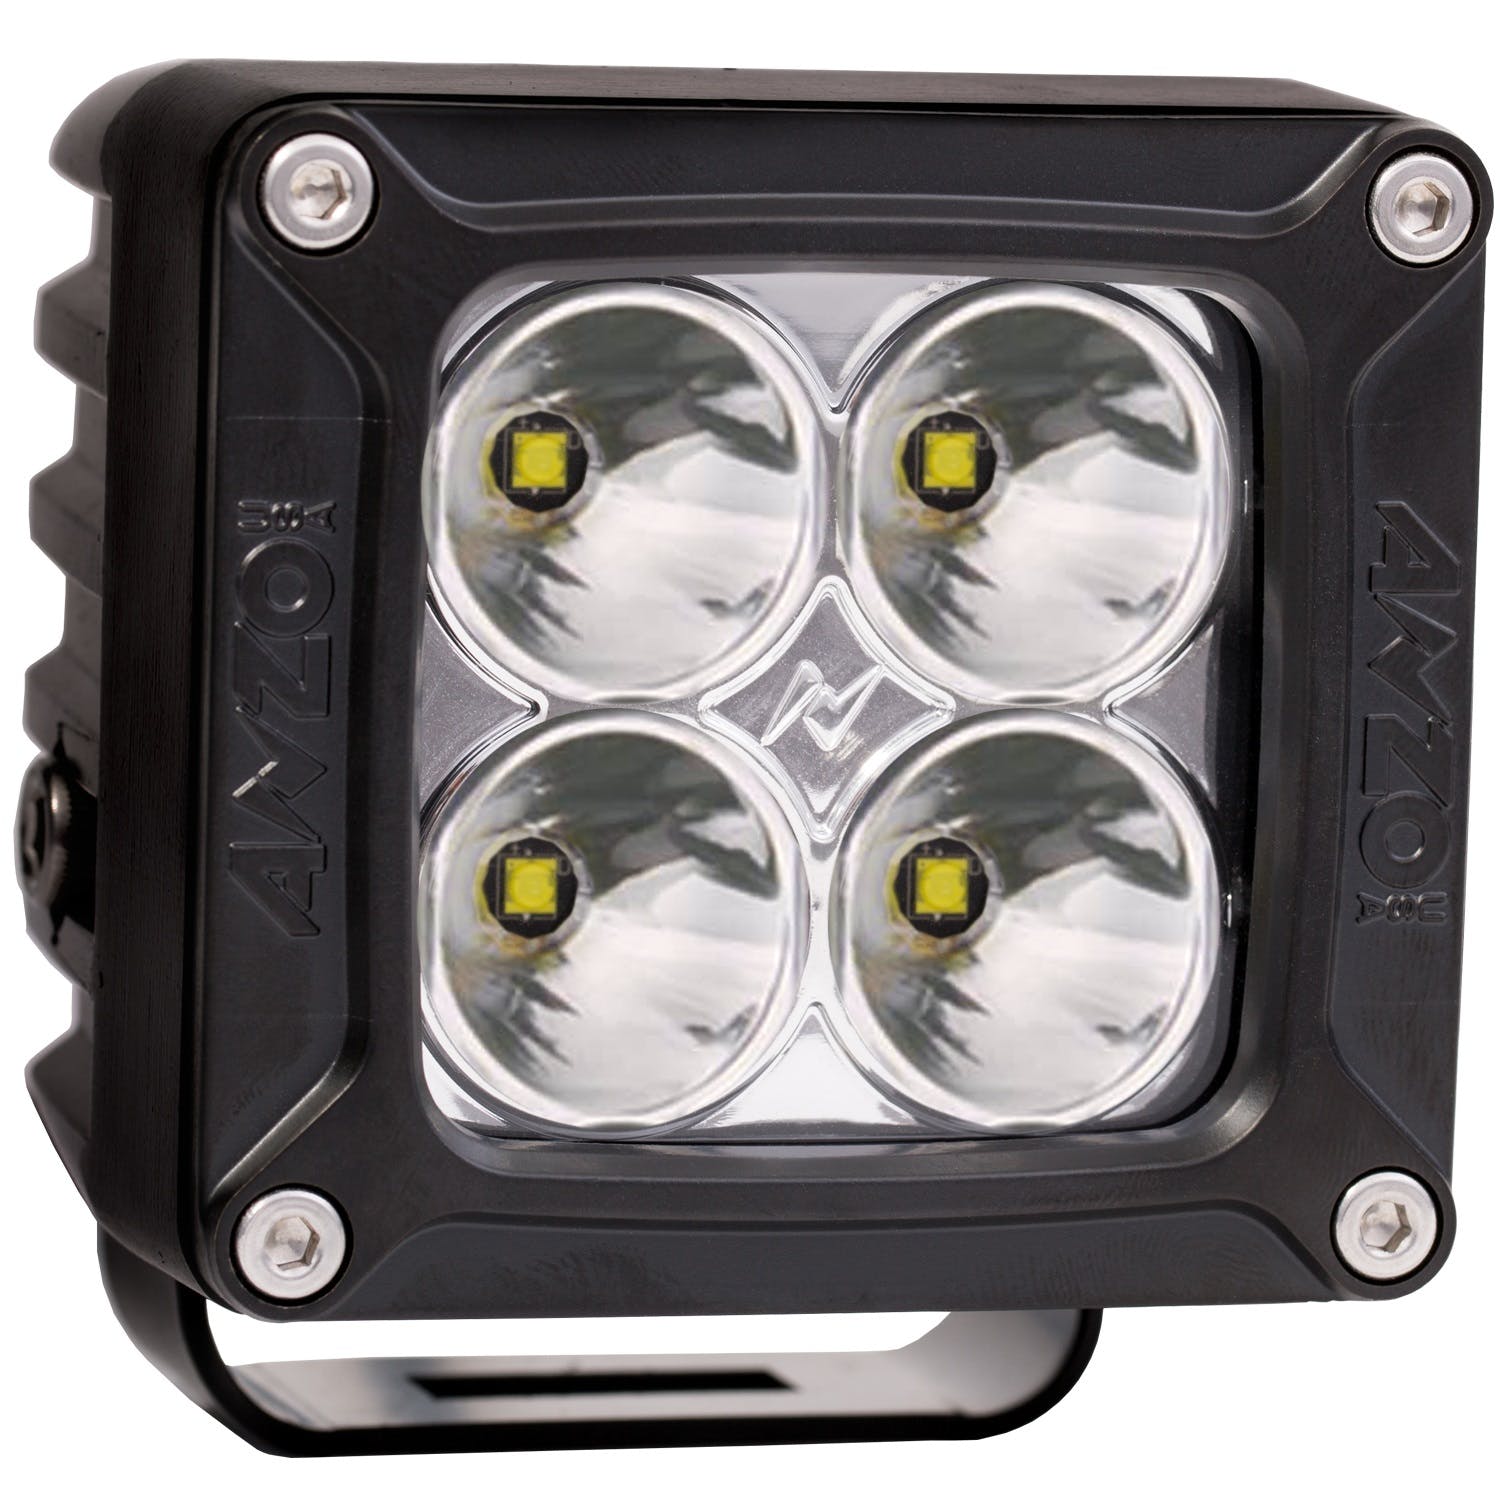 AnzoUSA 881045 3"x 3" High Power LED Off Road Spot Light with Harness